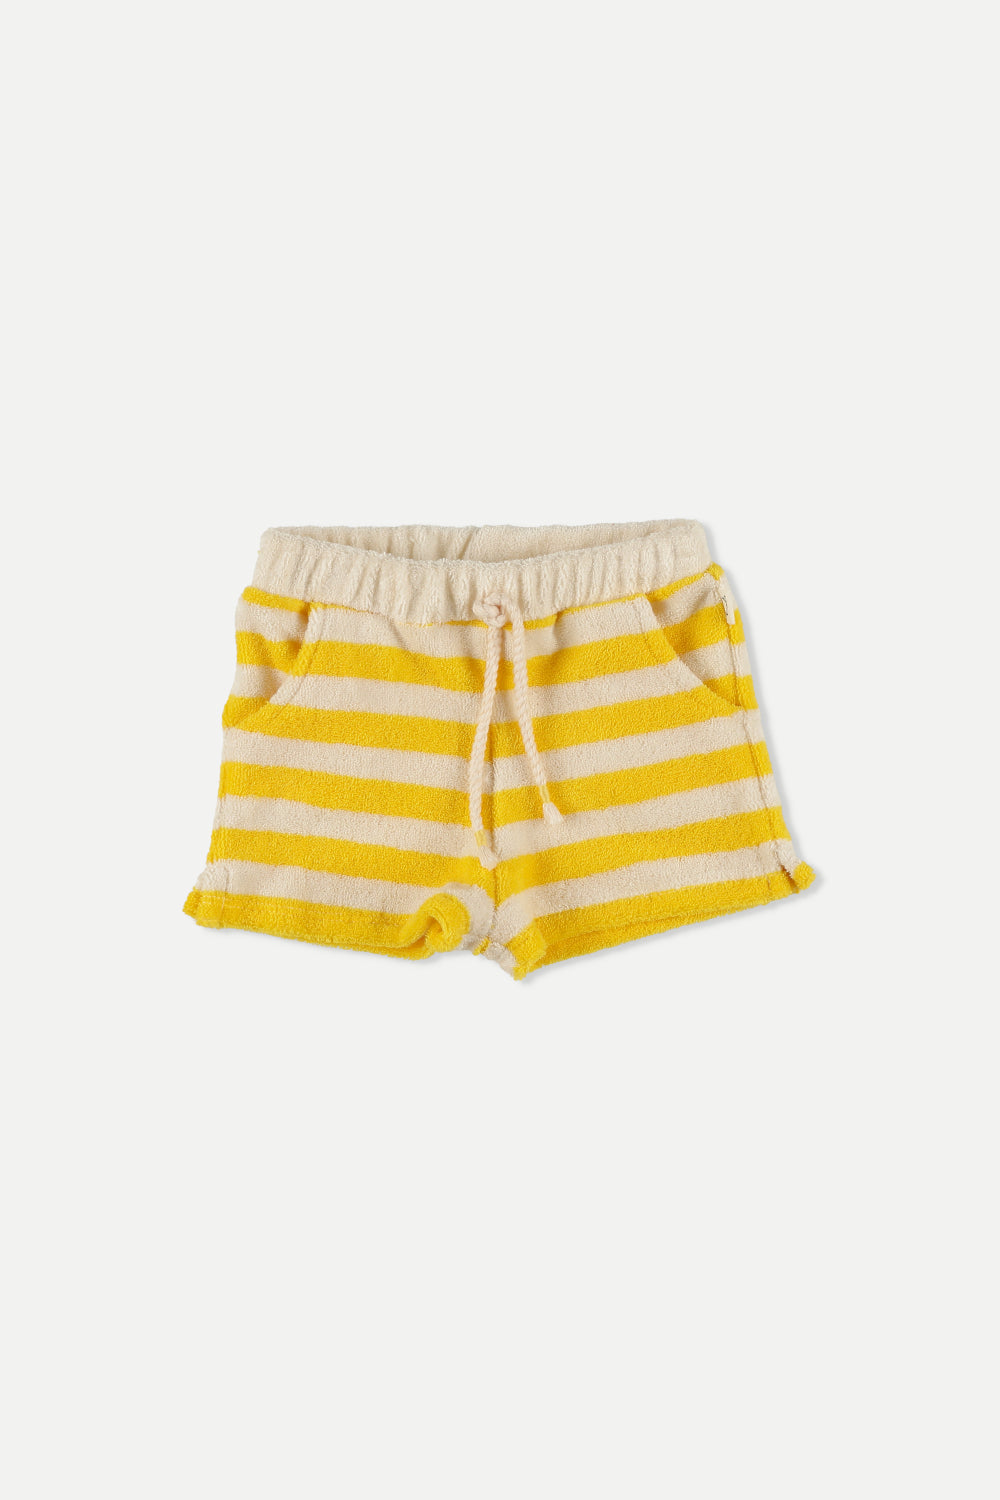 Short Mayles Toweling Stripes Yellow